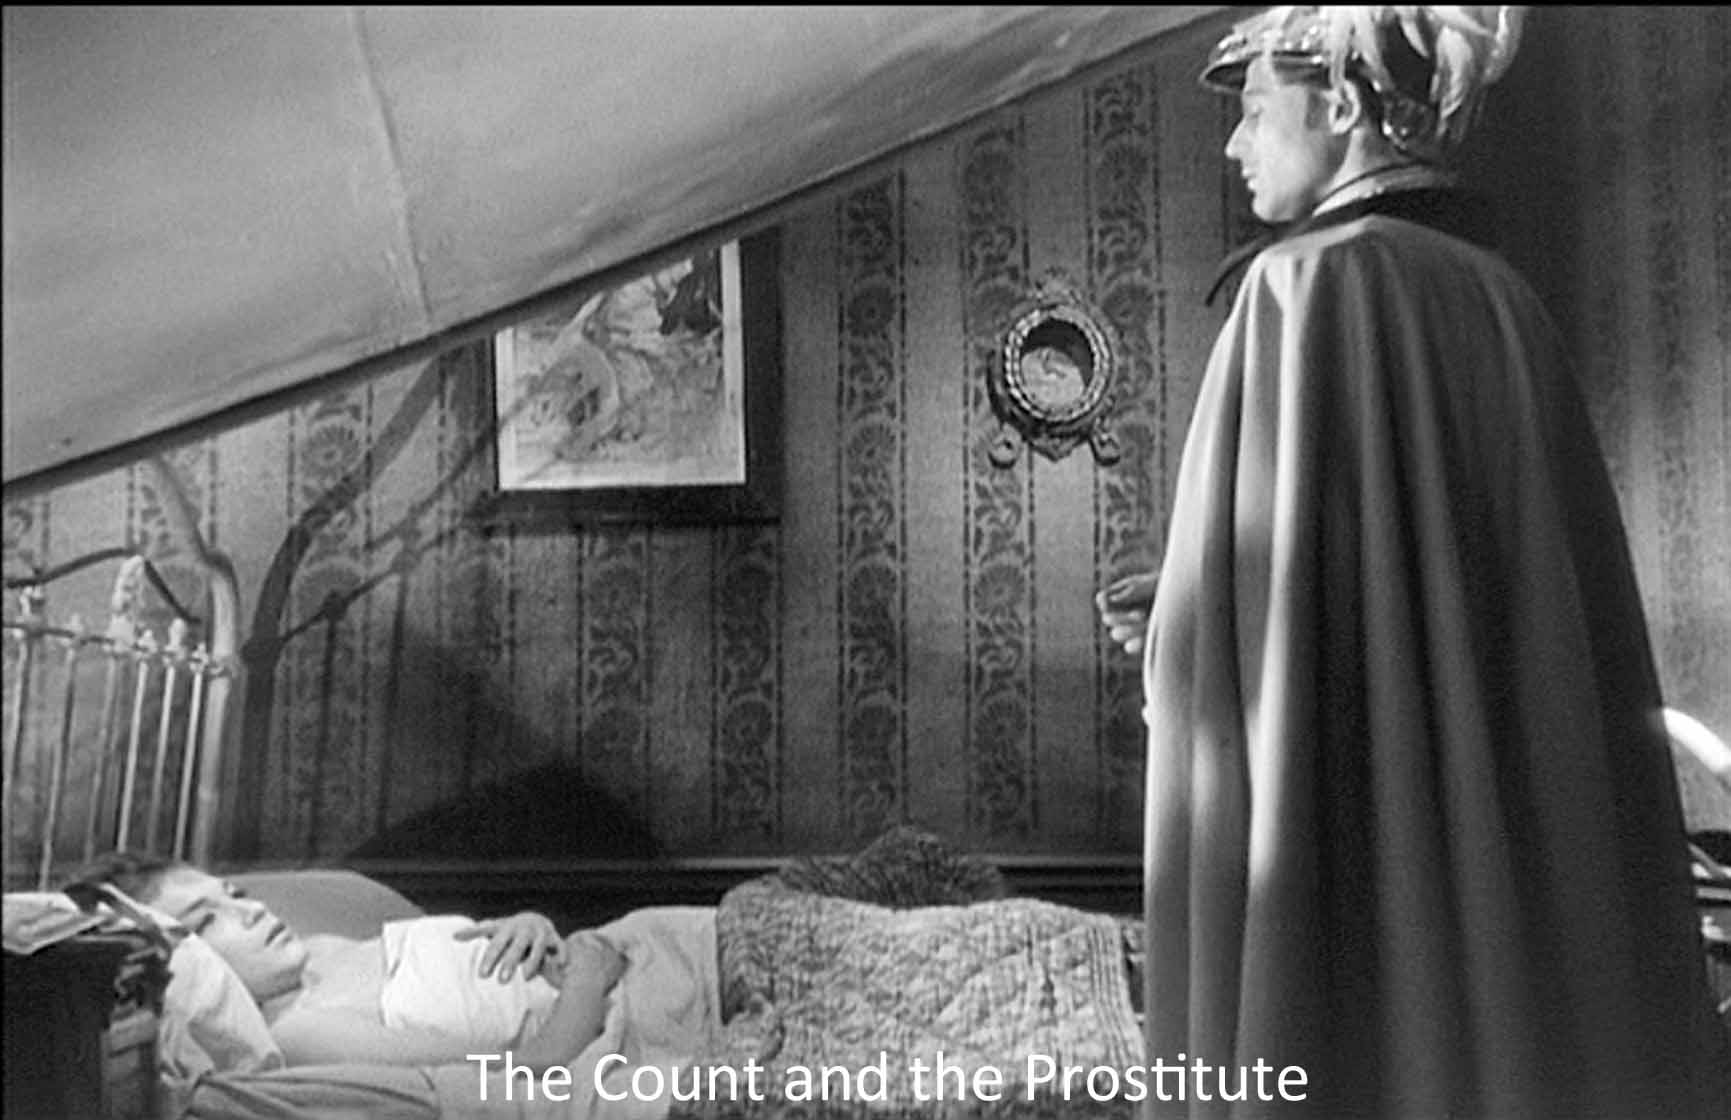 The Count and the Prostitute